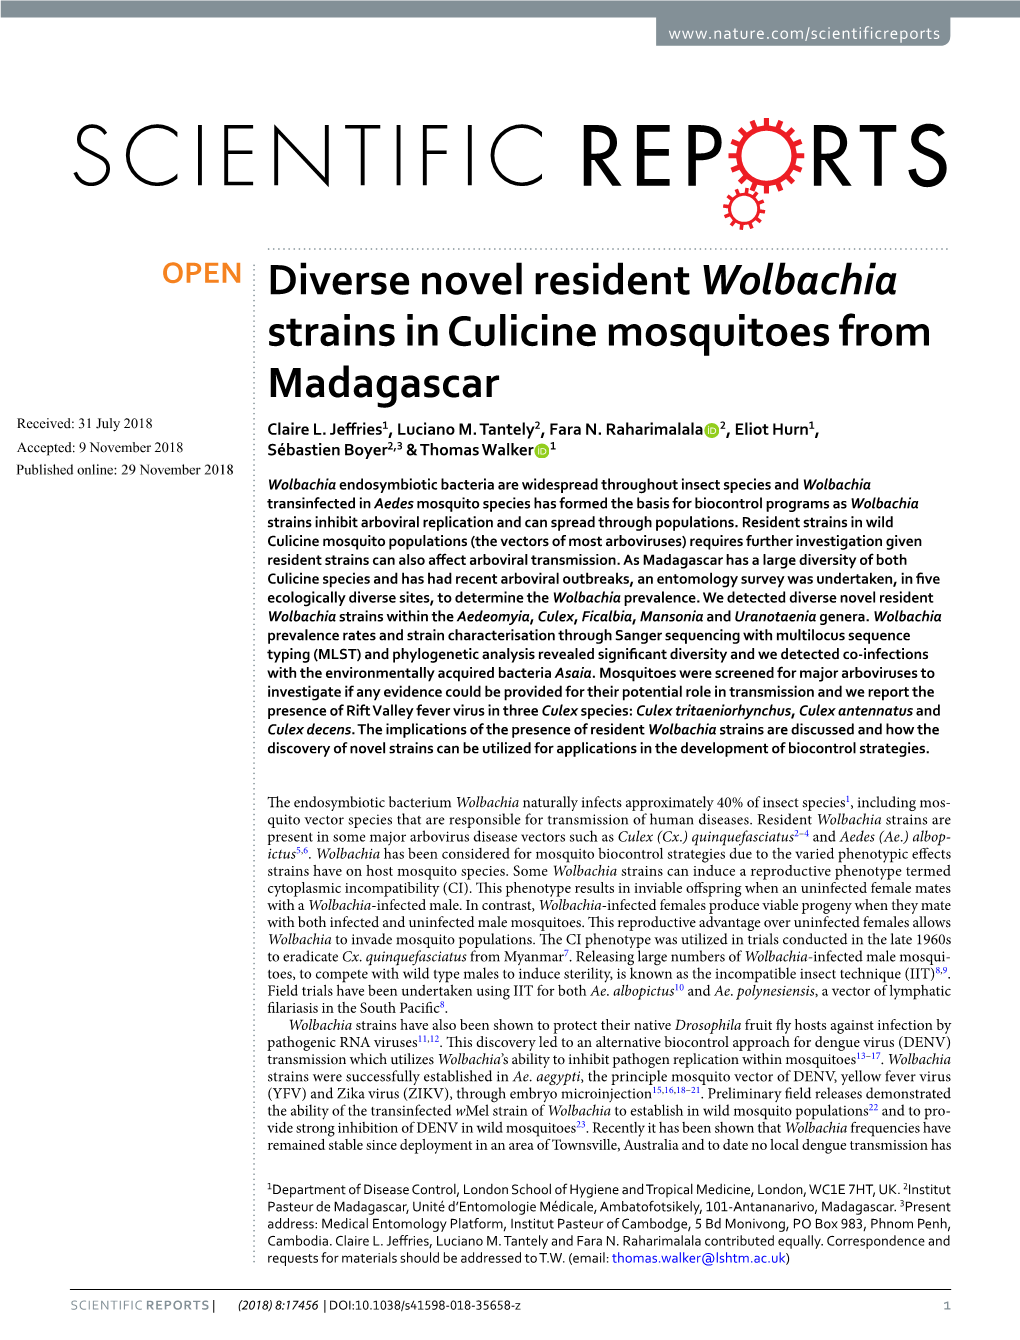 Diverse Novel Resident Wolbachia Strains in Culicine Mosquitoes from Madagascar Received: 31 July 2018 Claire L